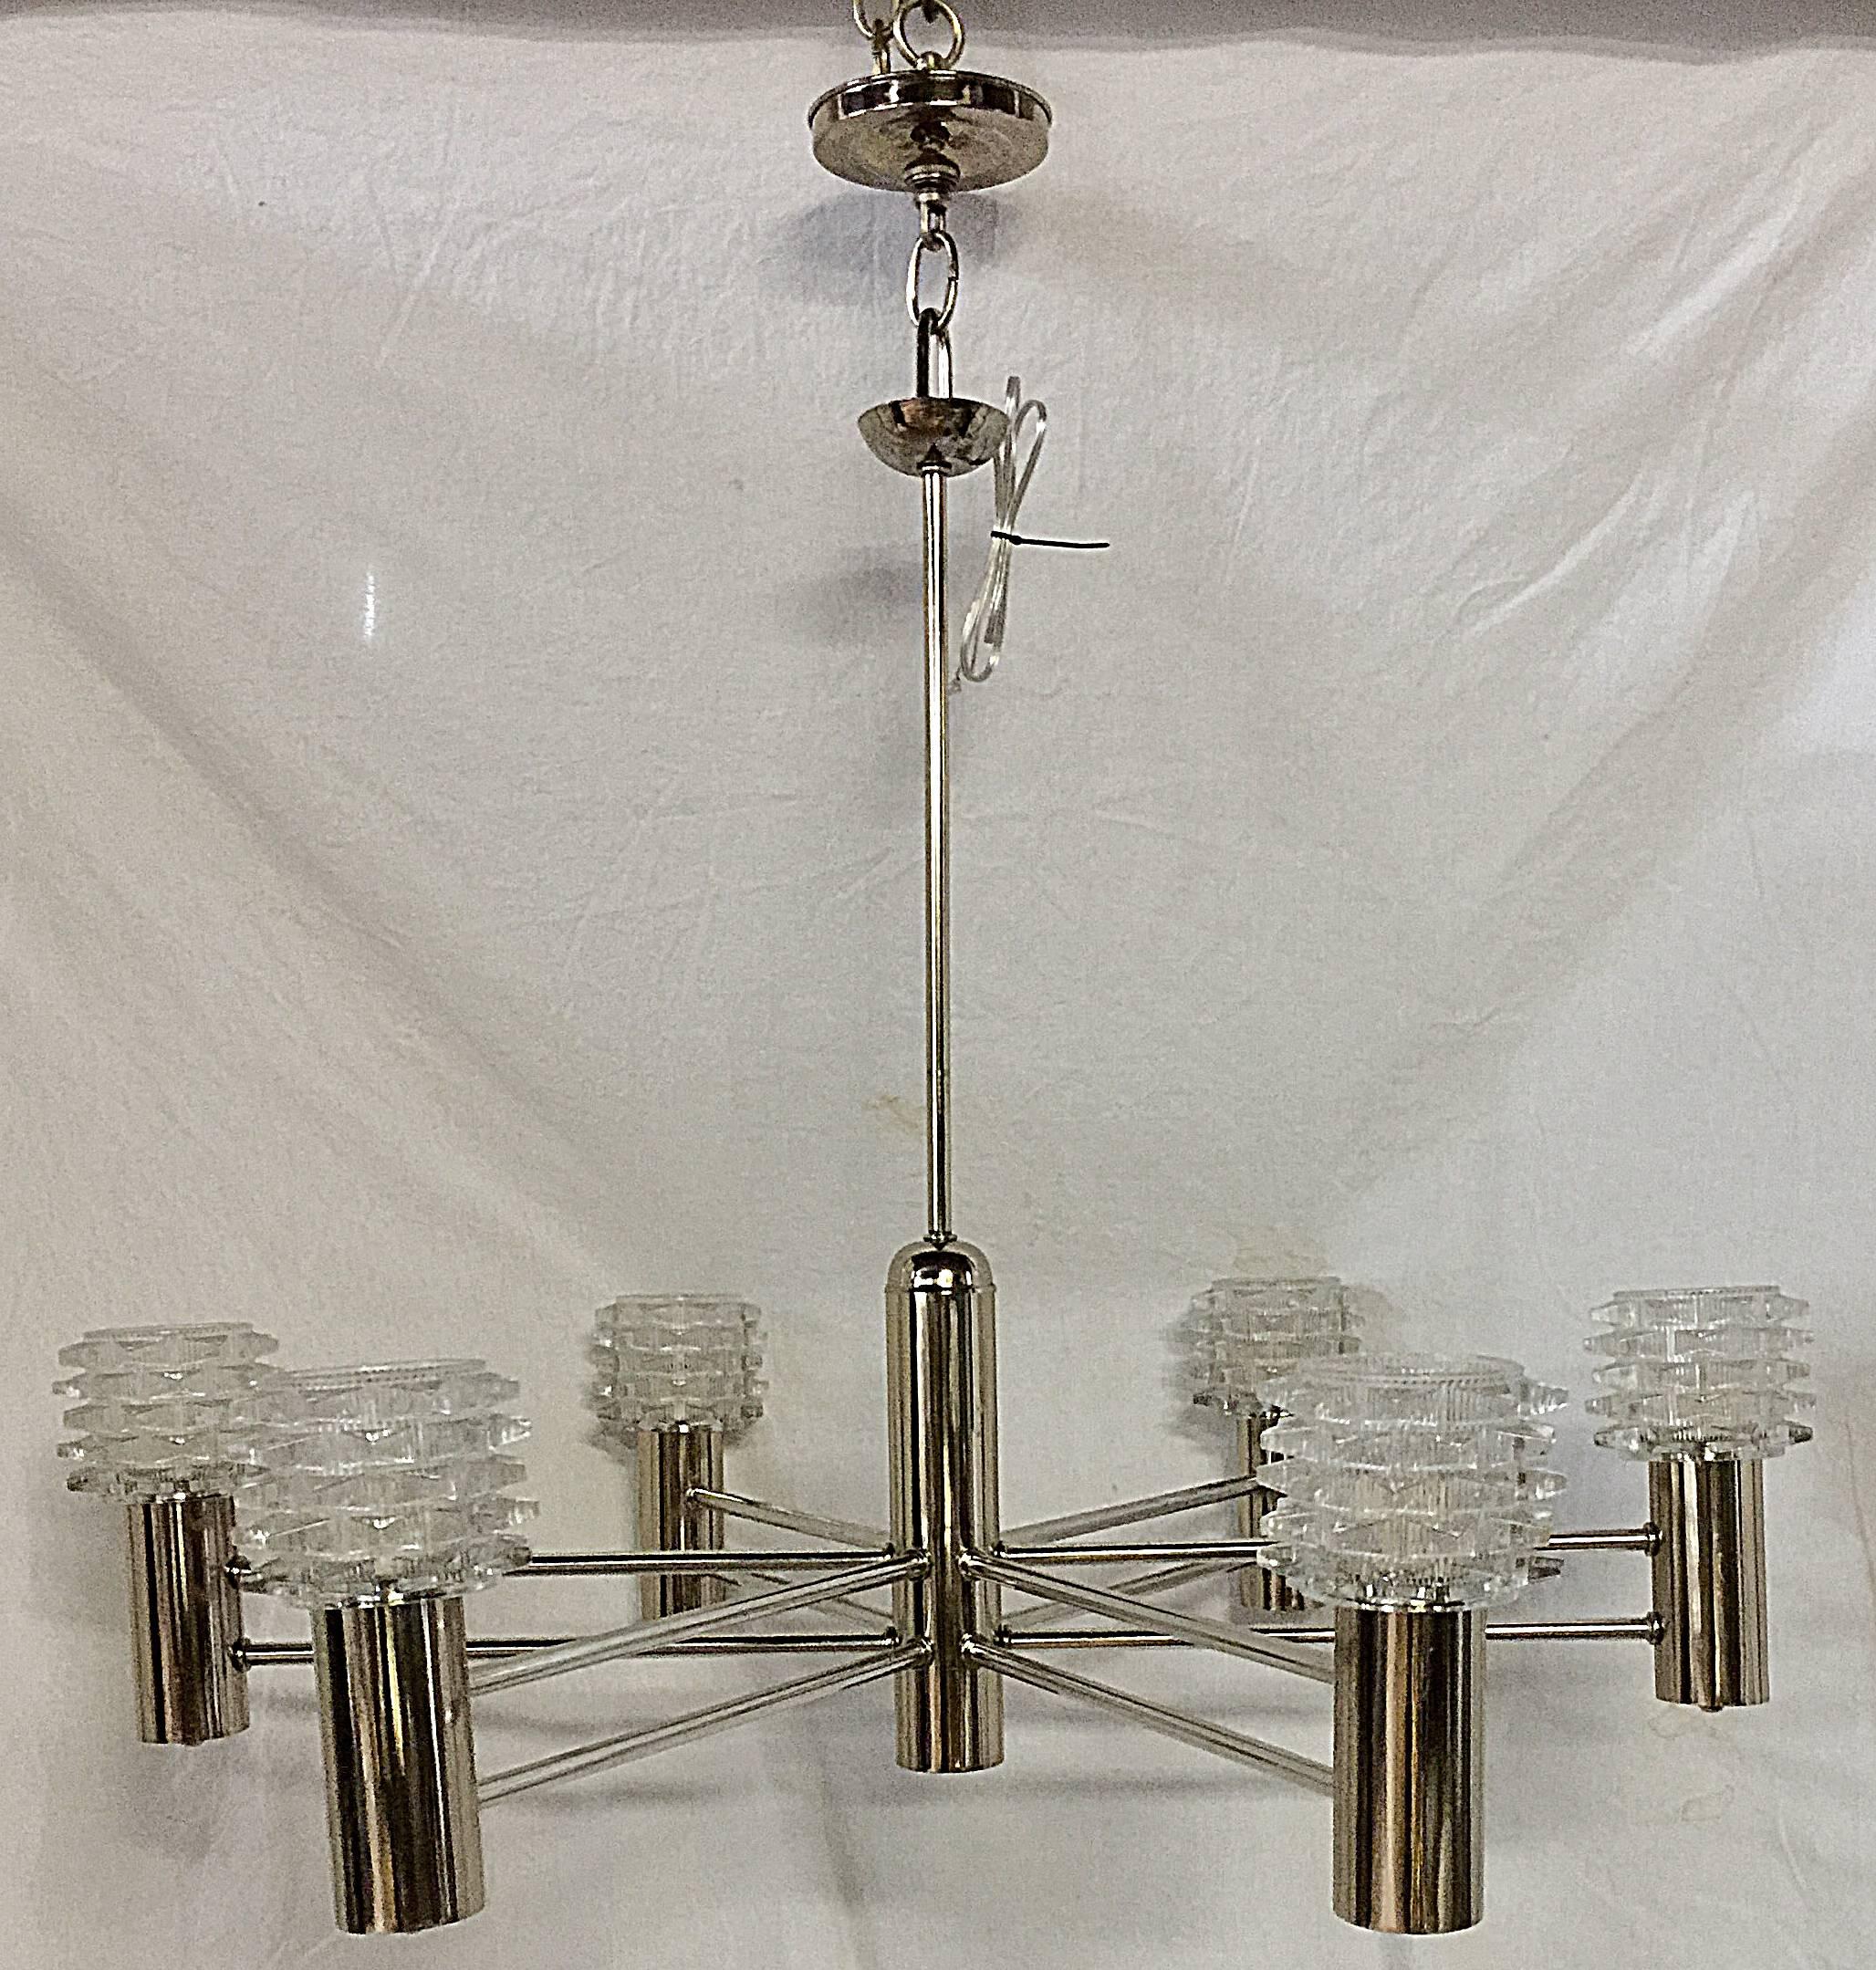 Nickel-Plated Light Fixture with Glass Globes In Good Condition For Sale In New York, NY